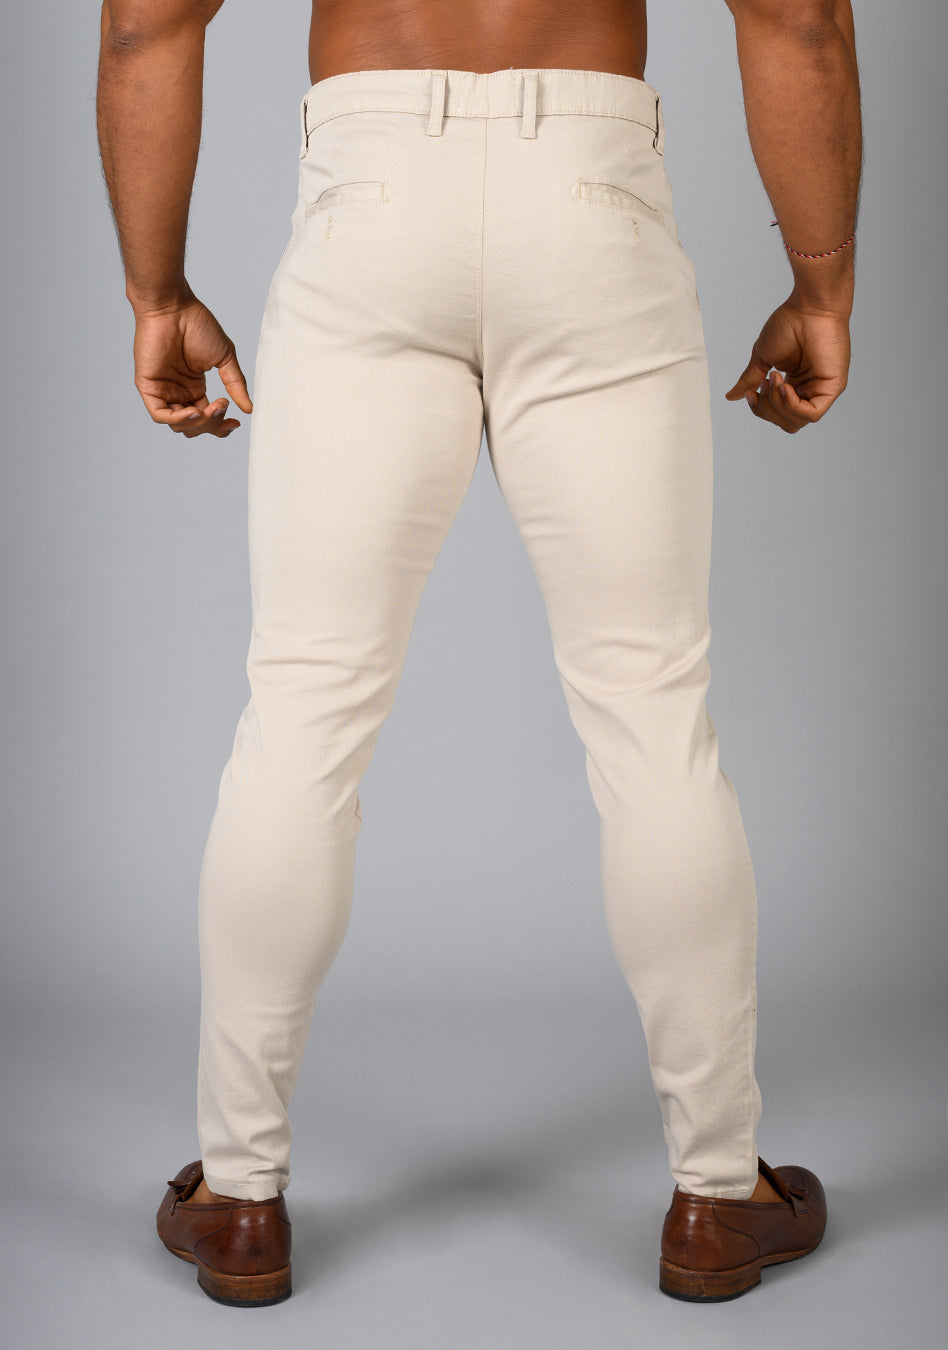 Oxcloth Beige muscle fit chinos offering a perfect blend of comfort and style for well-built physiques, with a contoured waist and athletic fit design for an on-trend appearance.